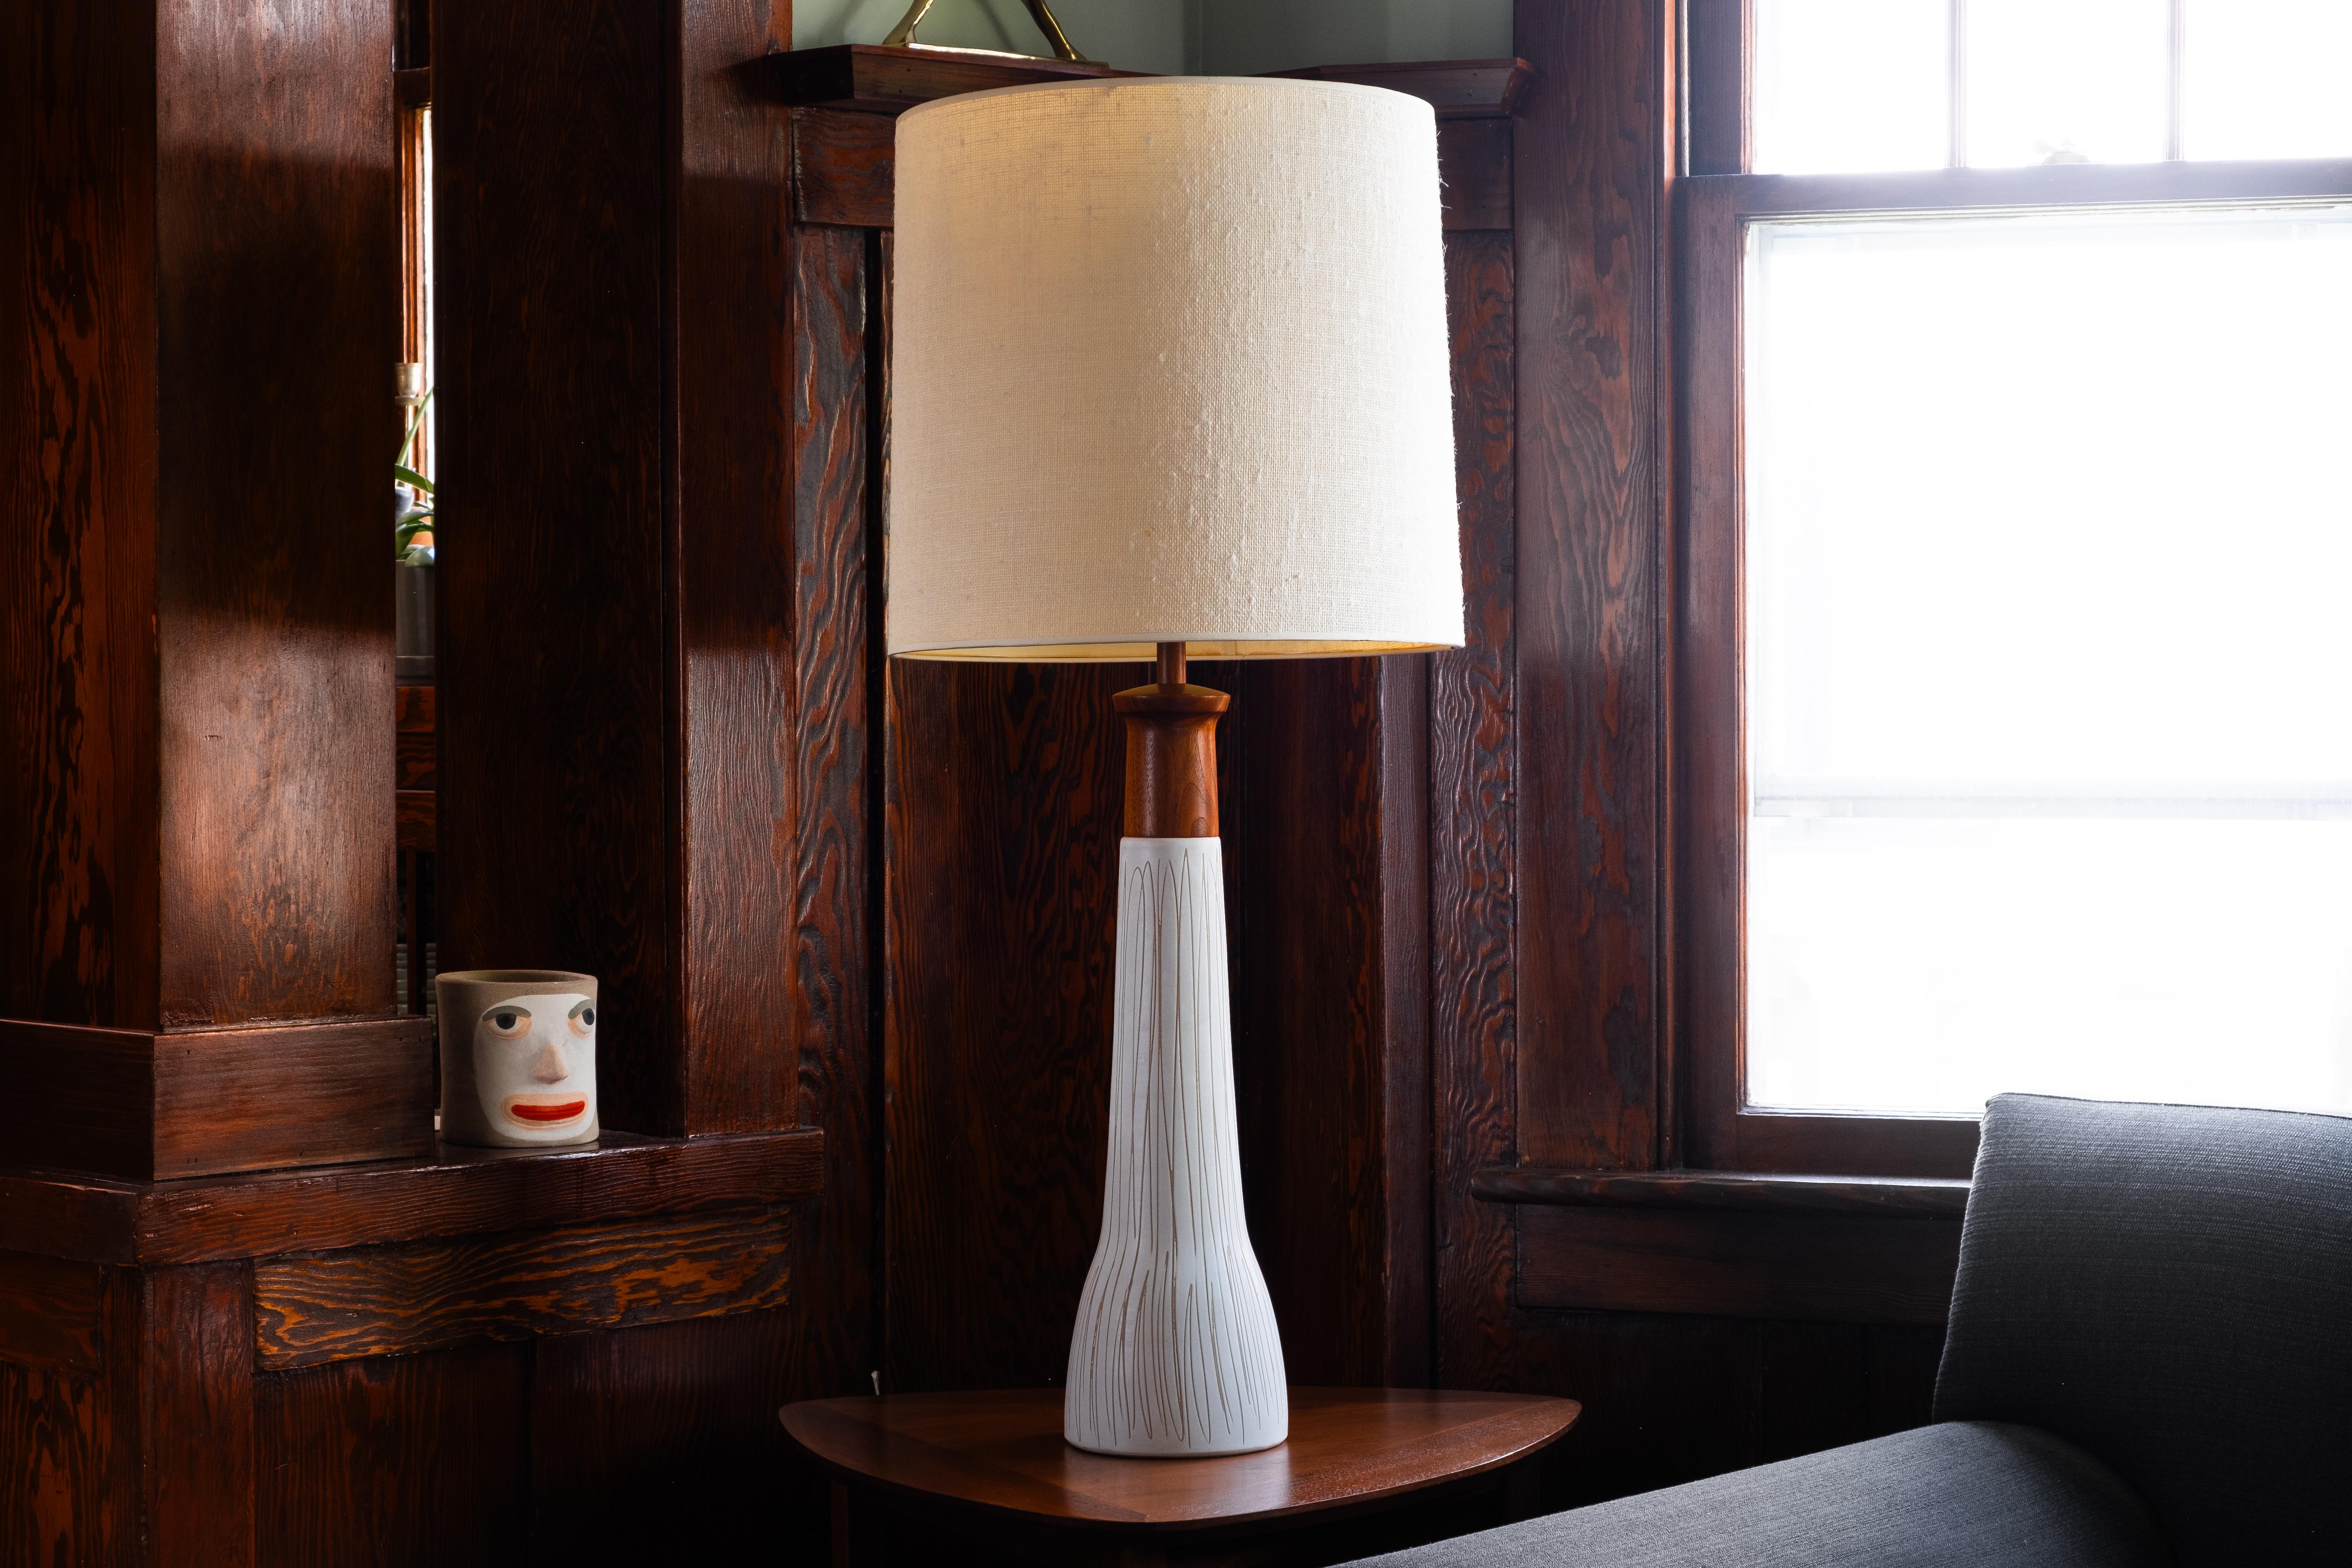 WHAT IS IT?
—
This pair of Martz model no. 165-28-1 lamps arrives with white glaze bodies that are decorated with a top-to-bottom incised line pattern. The lamps are topped off with large, turned sculptural walnut necks. The glaze of the lamps is